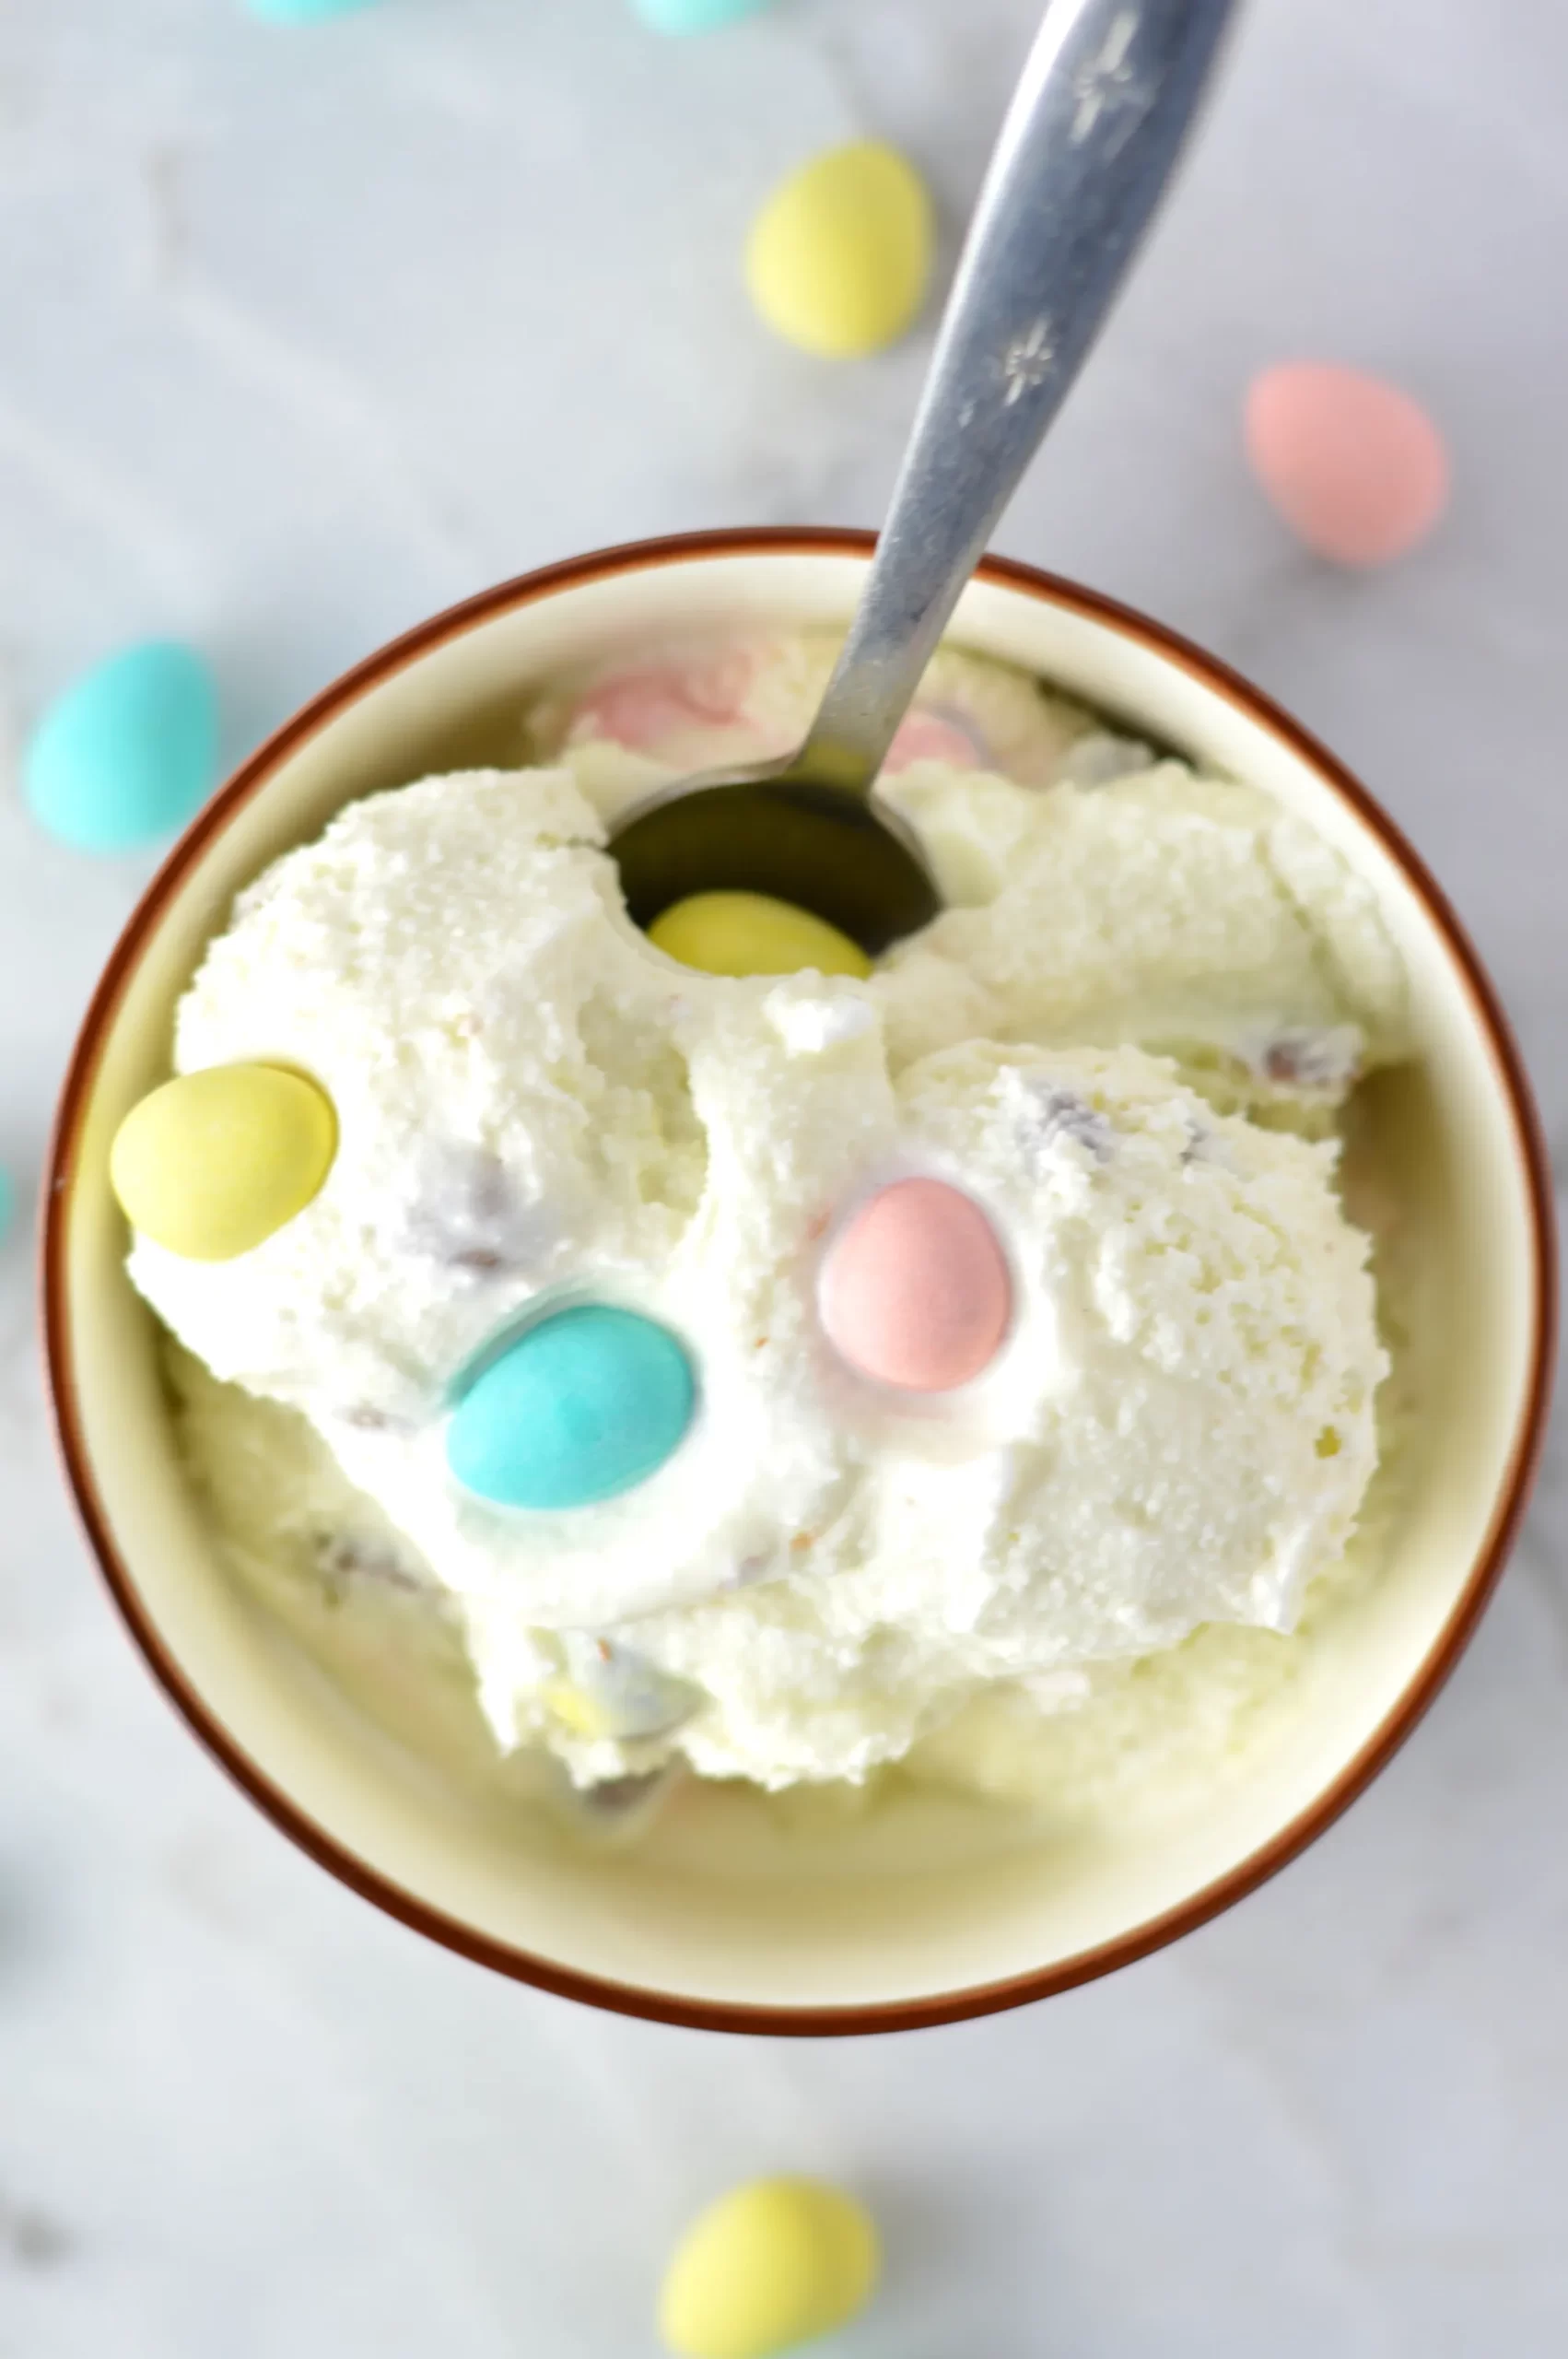 This is the perfect light and refreshing dessert idea to make for Easter, or if you are craving mini eggs!